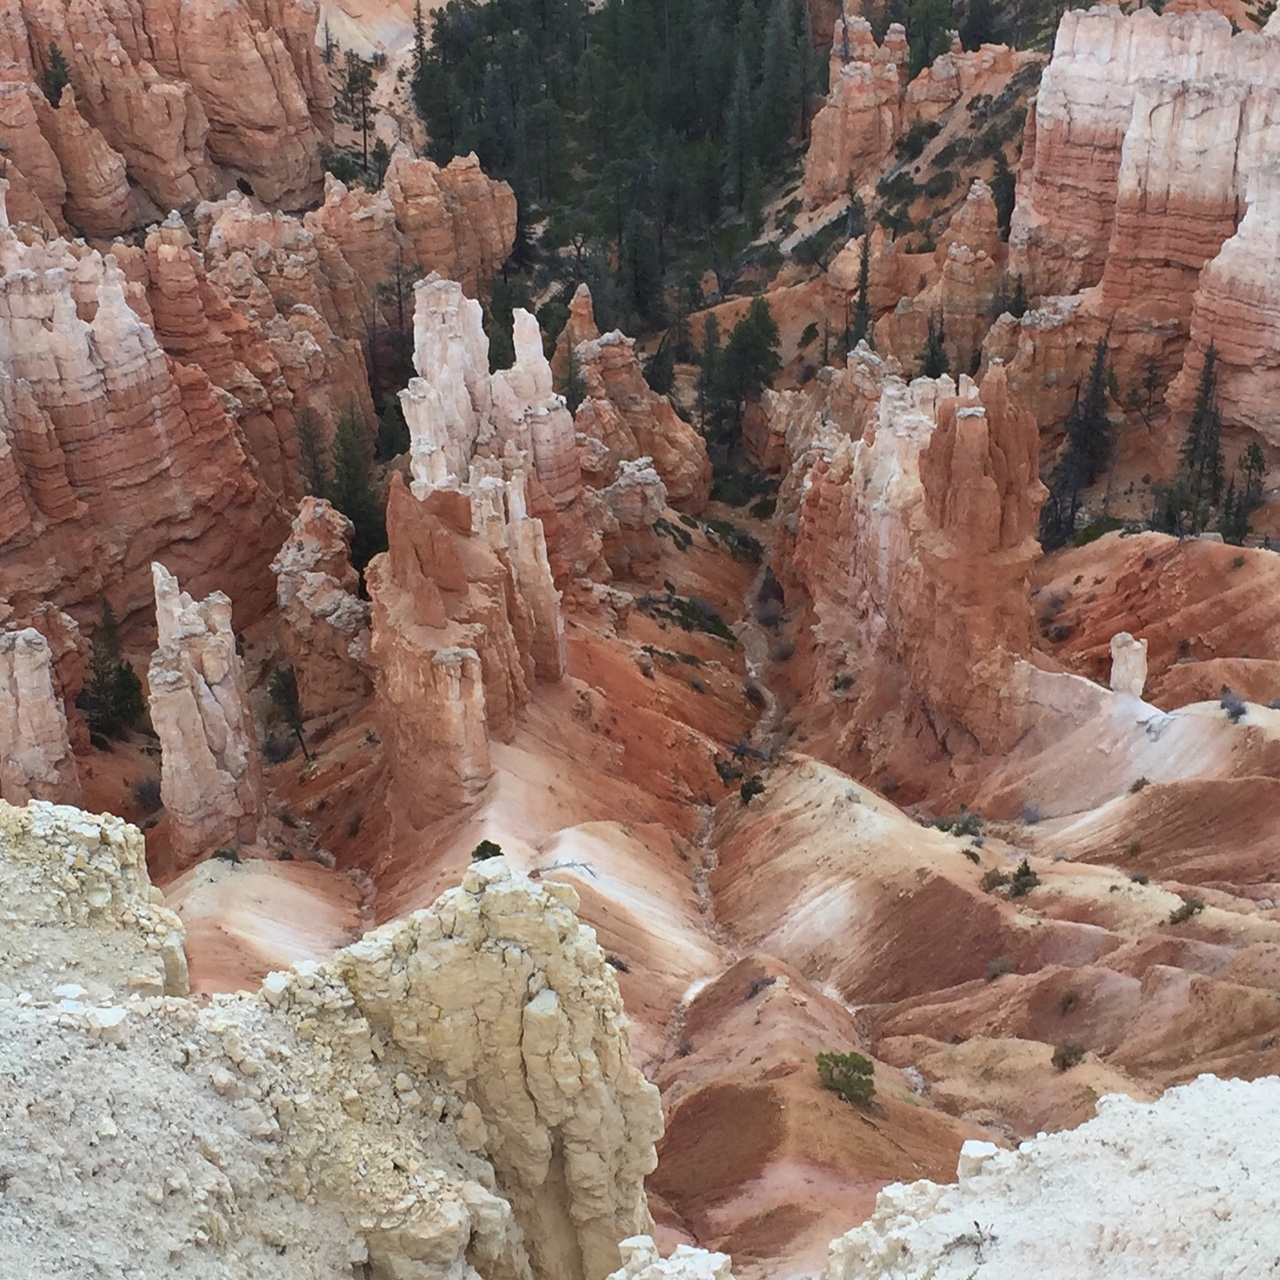 Inspiration Point, Bryce Canyon